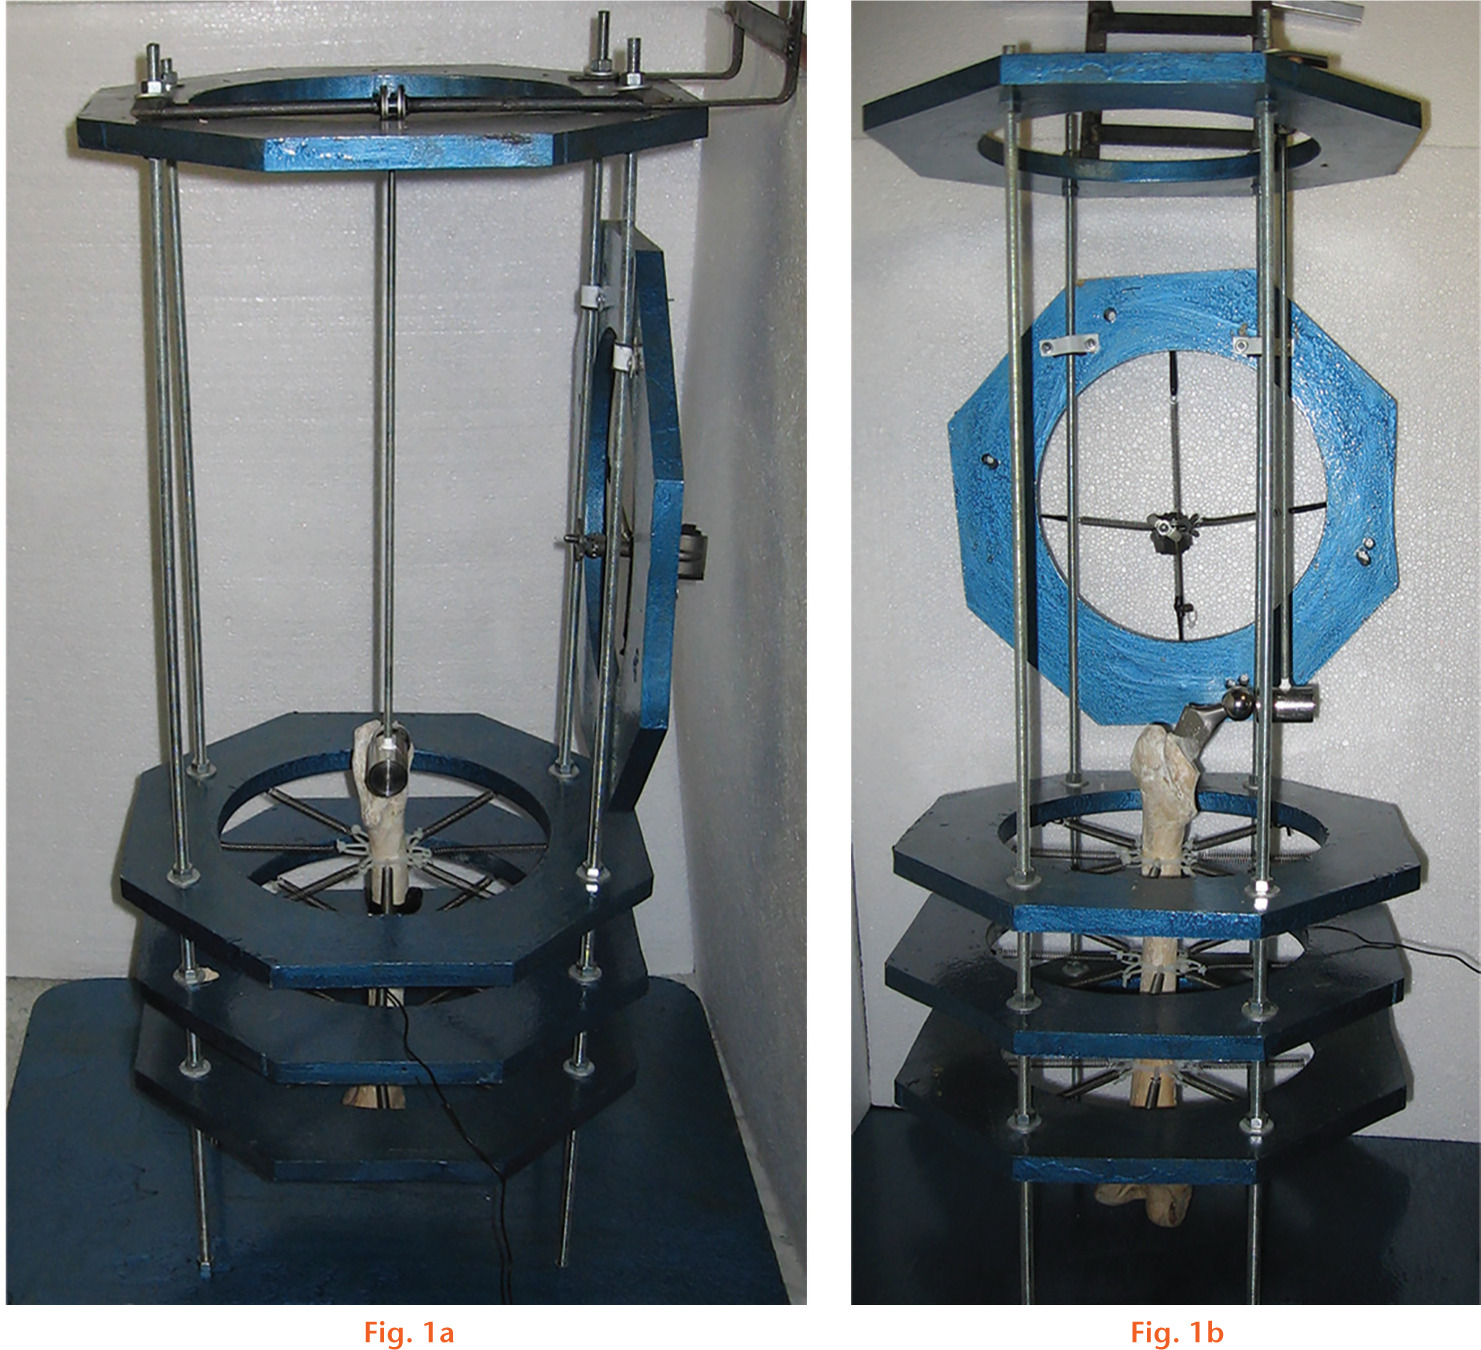  
            Photographs showing a) front view of the setup with the three octagonal rings supported by four roads and a stem implanted in a cadaveric bone femur aligned at the centre of the rings; and b) lateral view of the setup.
          